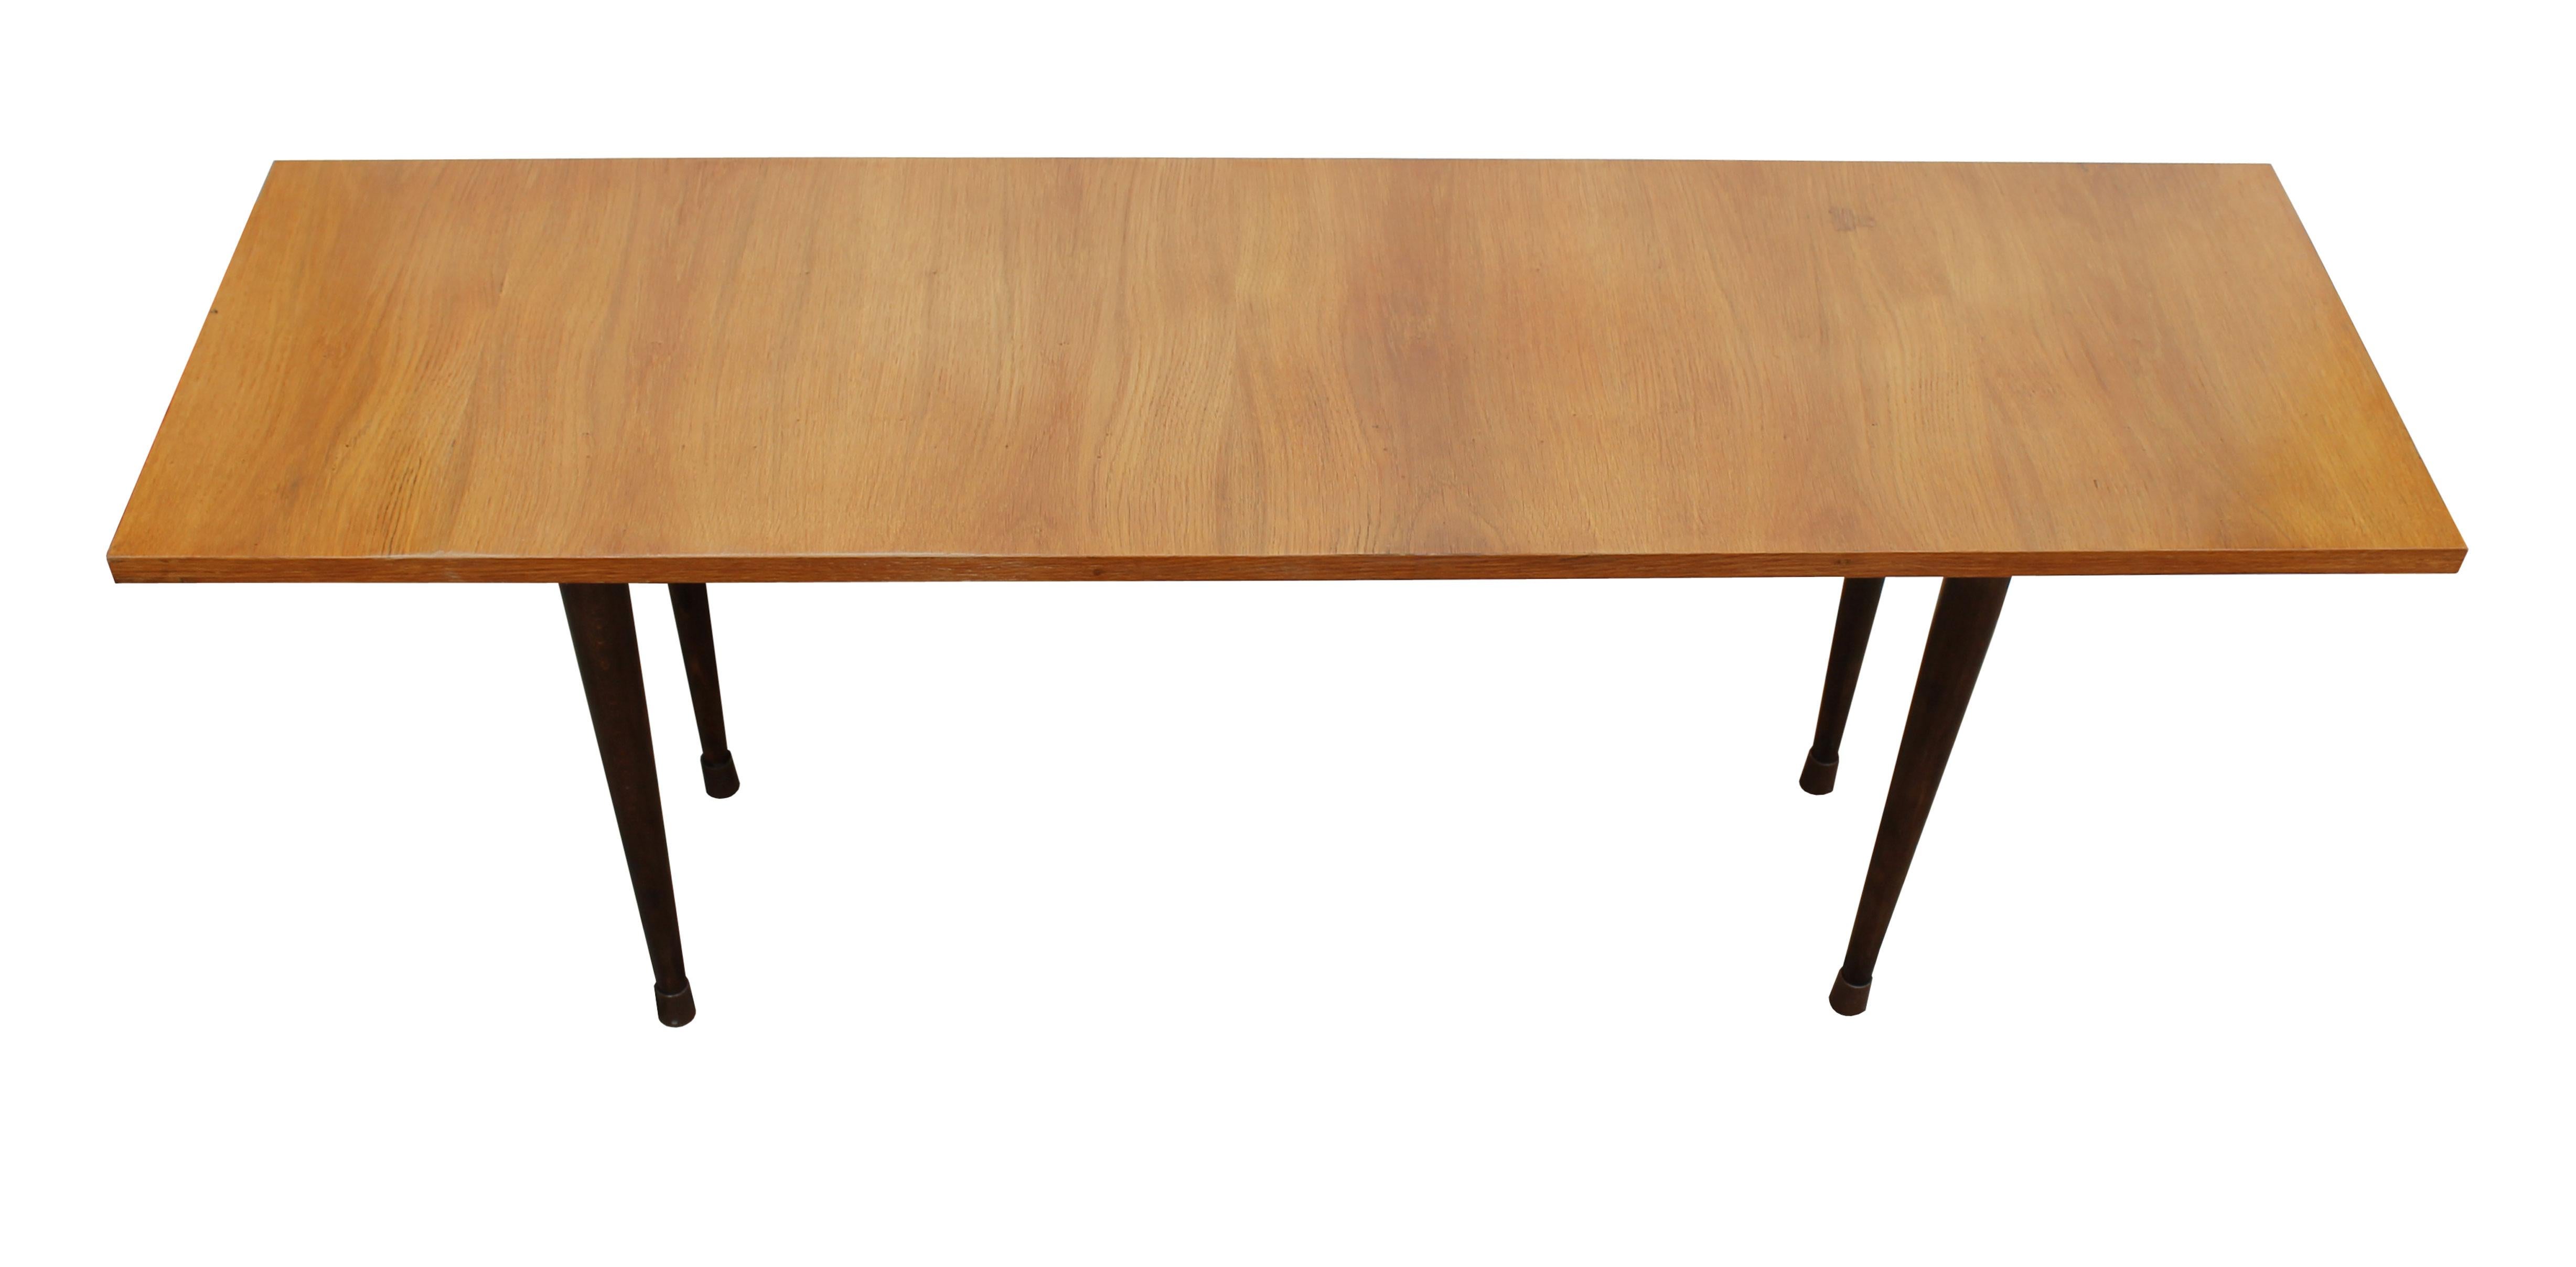 A long wooden coffee table designed in the style of Scandinavian Modern, but produced in Czechoslovakia in the late 1960’s.

In the 1960’s, the Czech furniture design was largely influenced by Scandinavian design. This influence is noticeable on